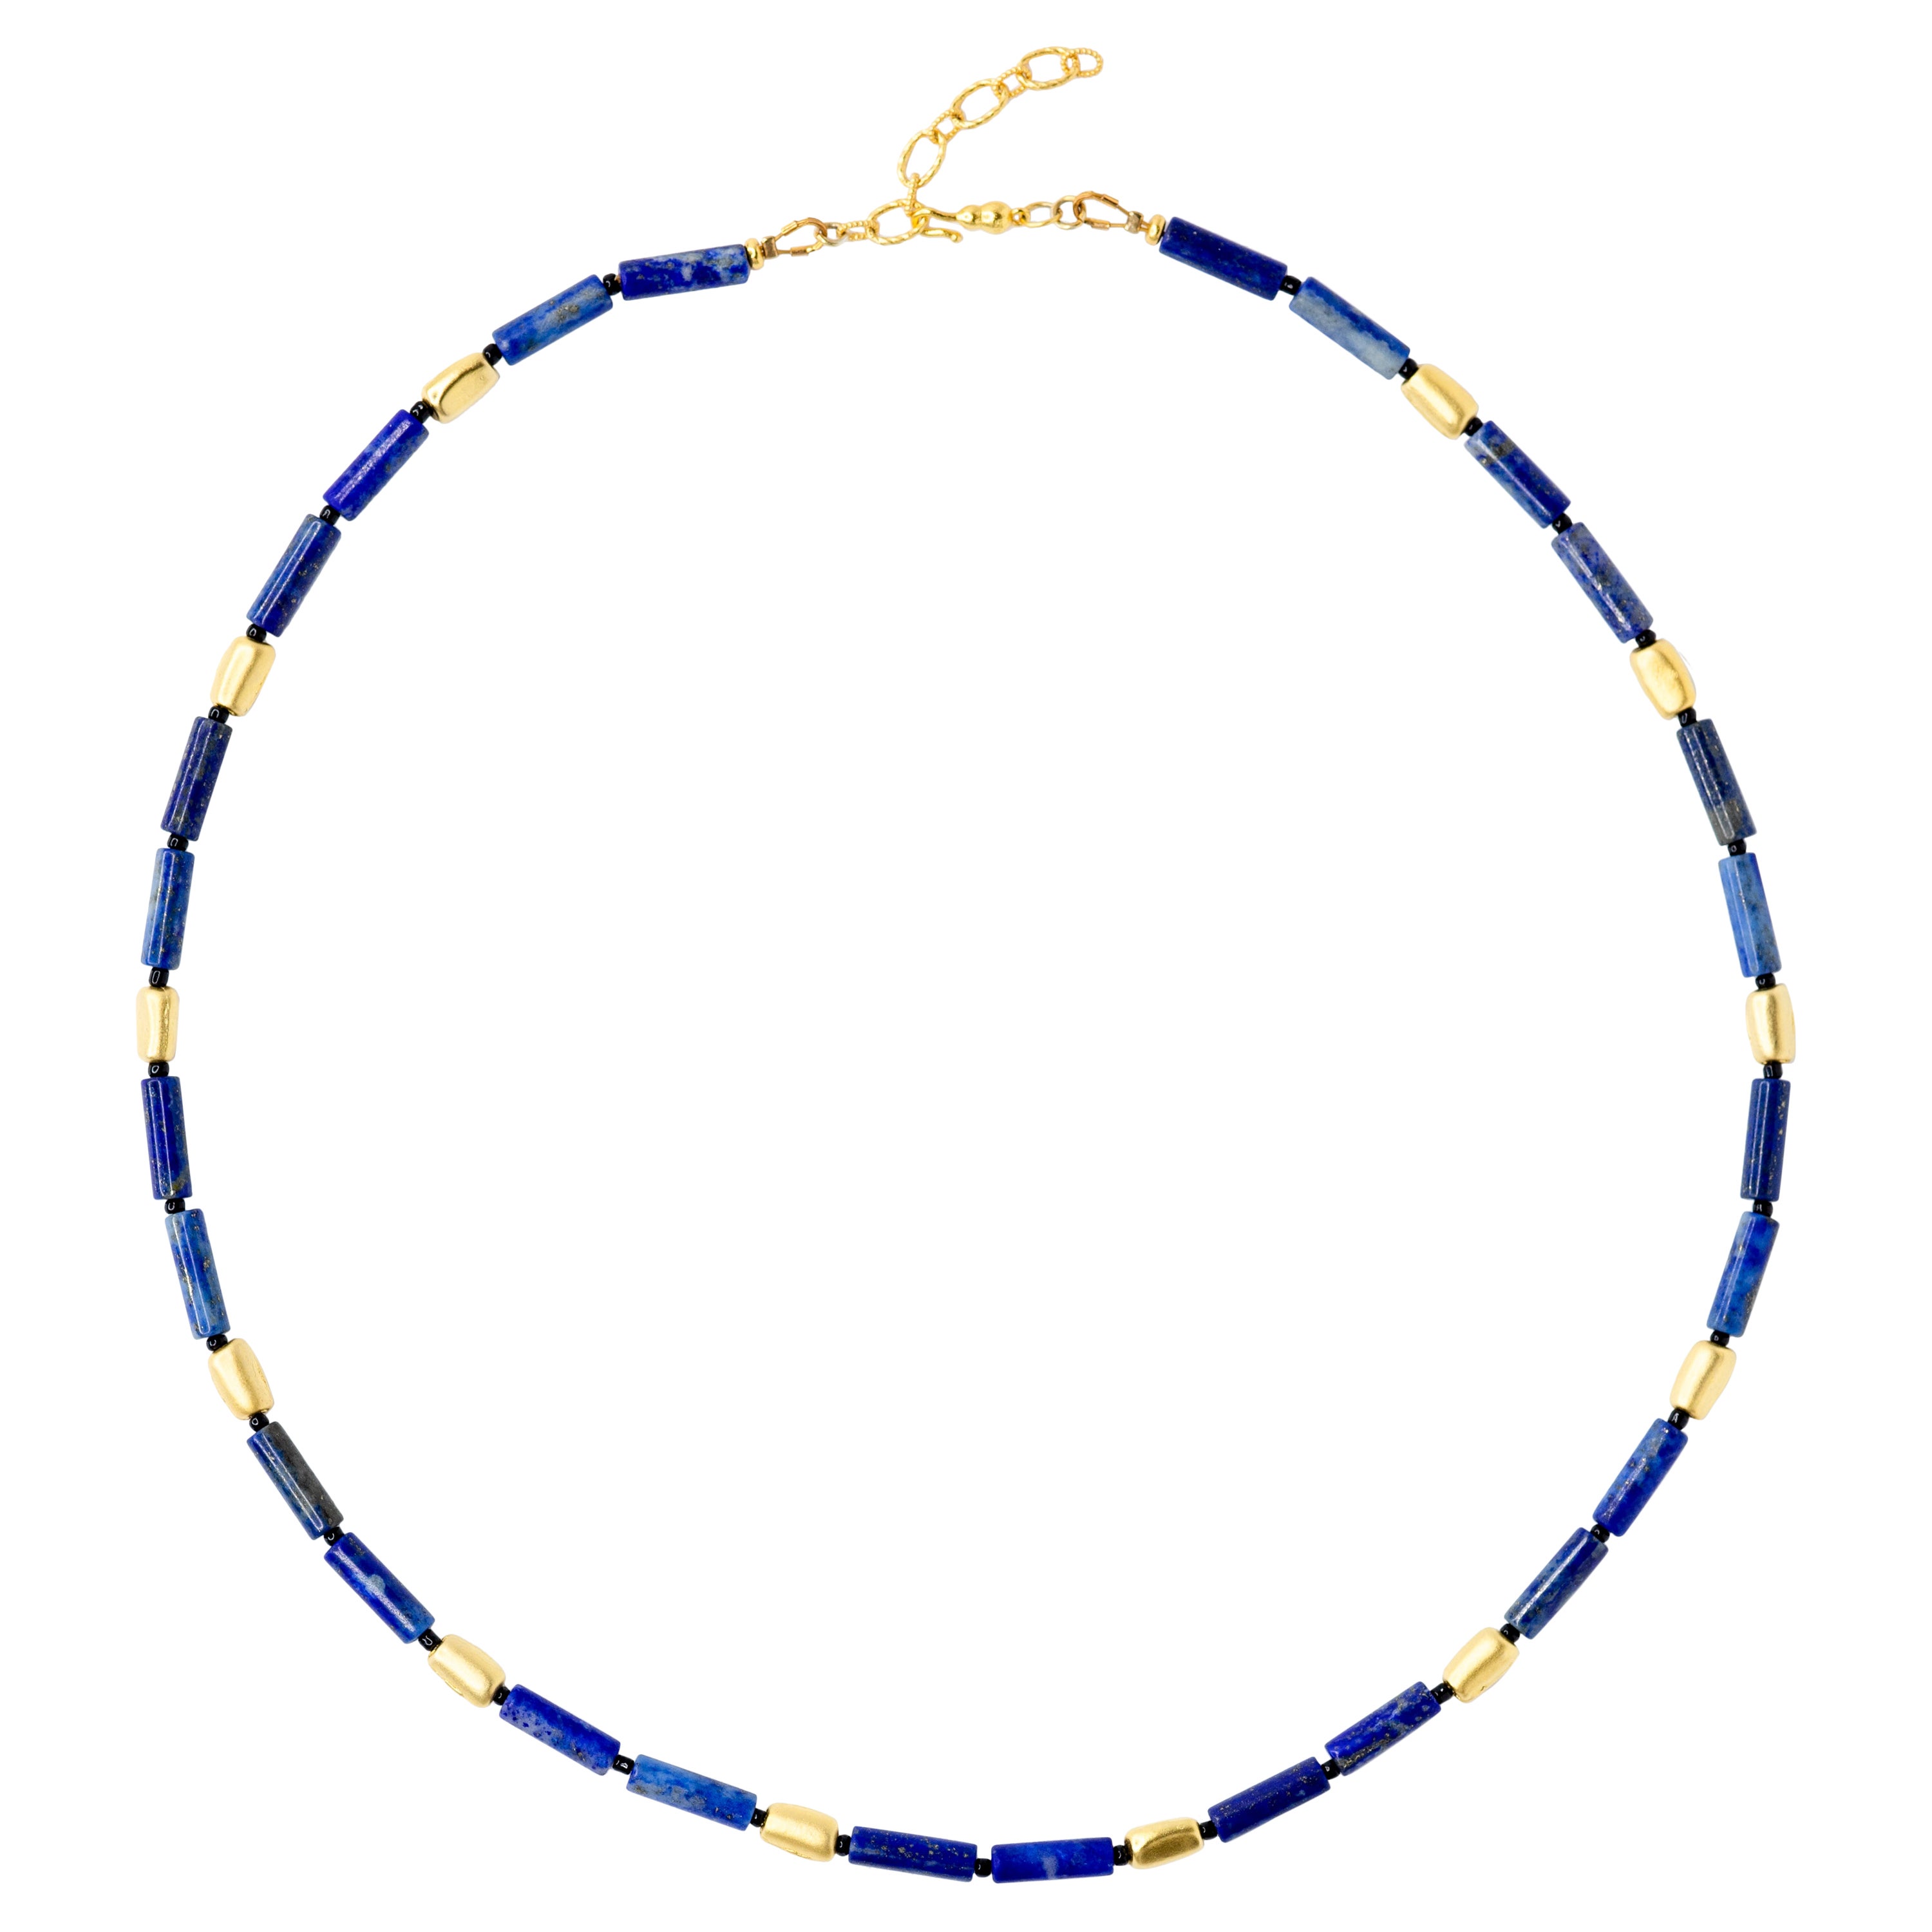 Dive into the modern, edgy sophistication of this Lapis Lazuli necklace. Its sleek simplicity speaks volumes, effortlessly blending timeless beauty with a contemporary vibe. Feel uniquely remarkable, draped in an elegance that perfectly complements